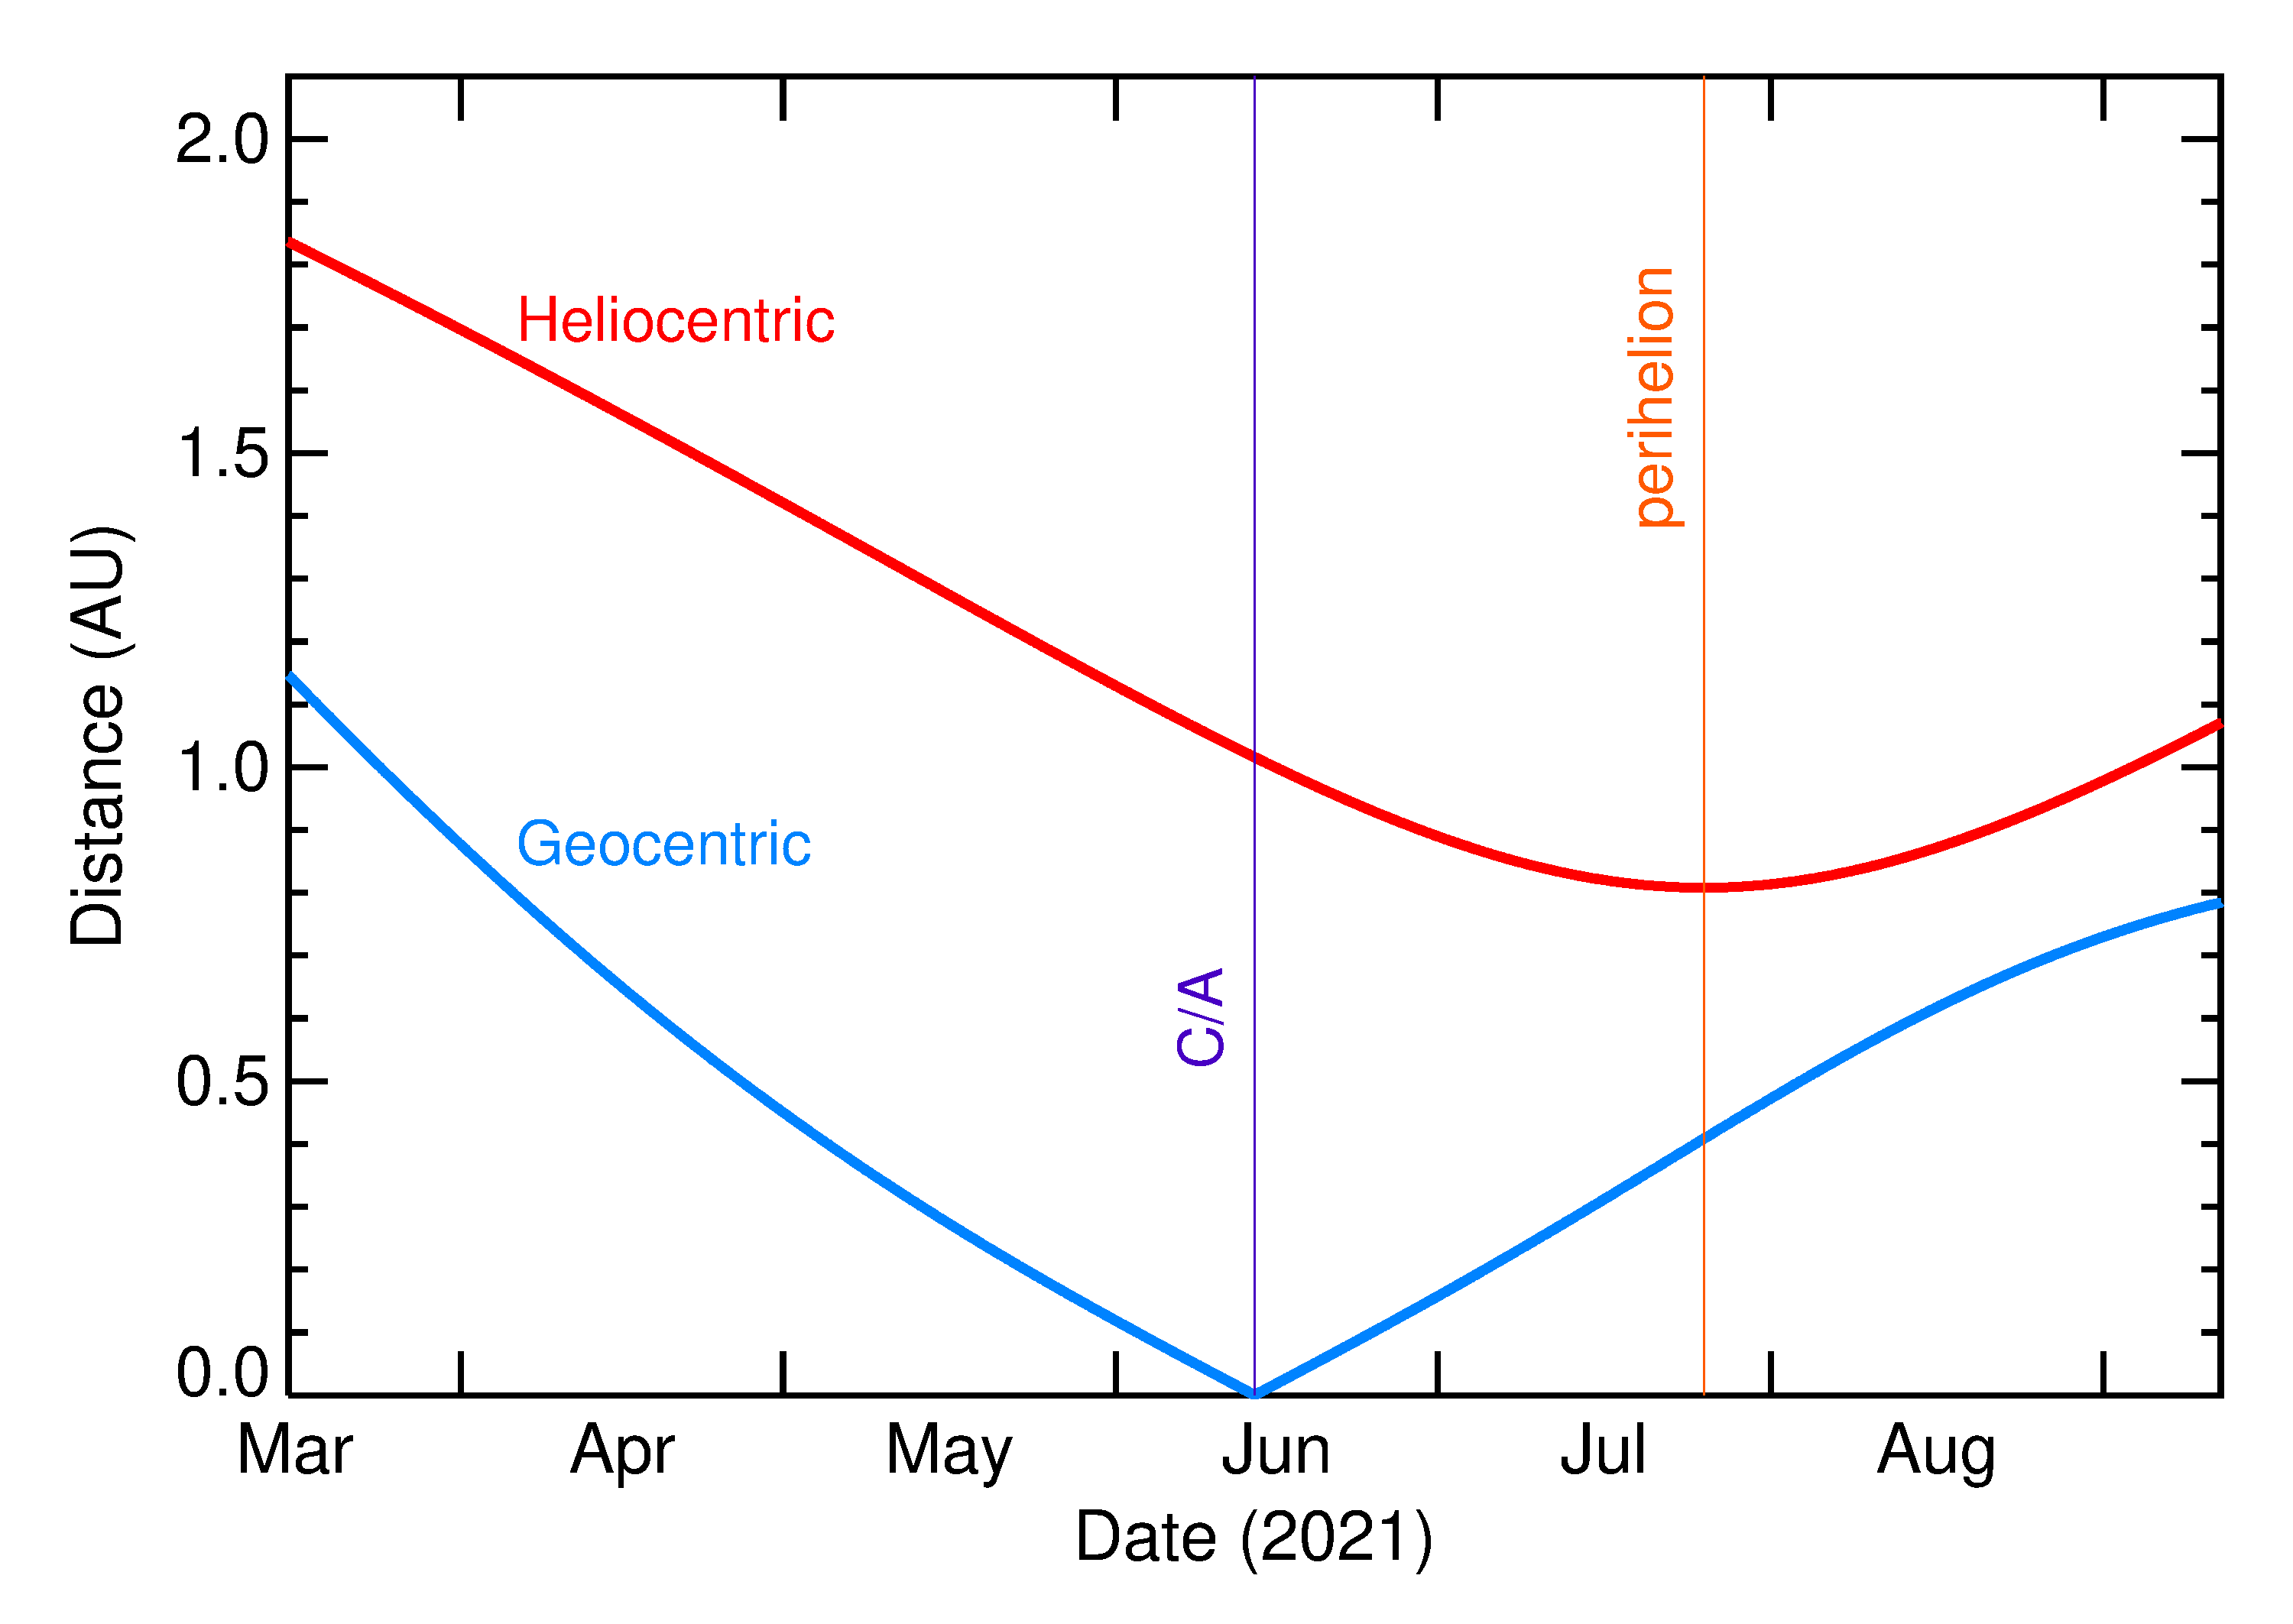 Heliocentric and Geocentric Distances of 2021 LG5 in the months around closest approach